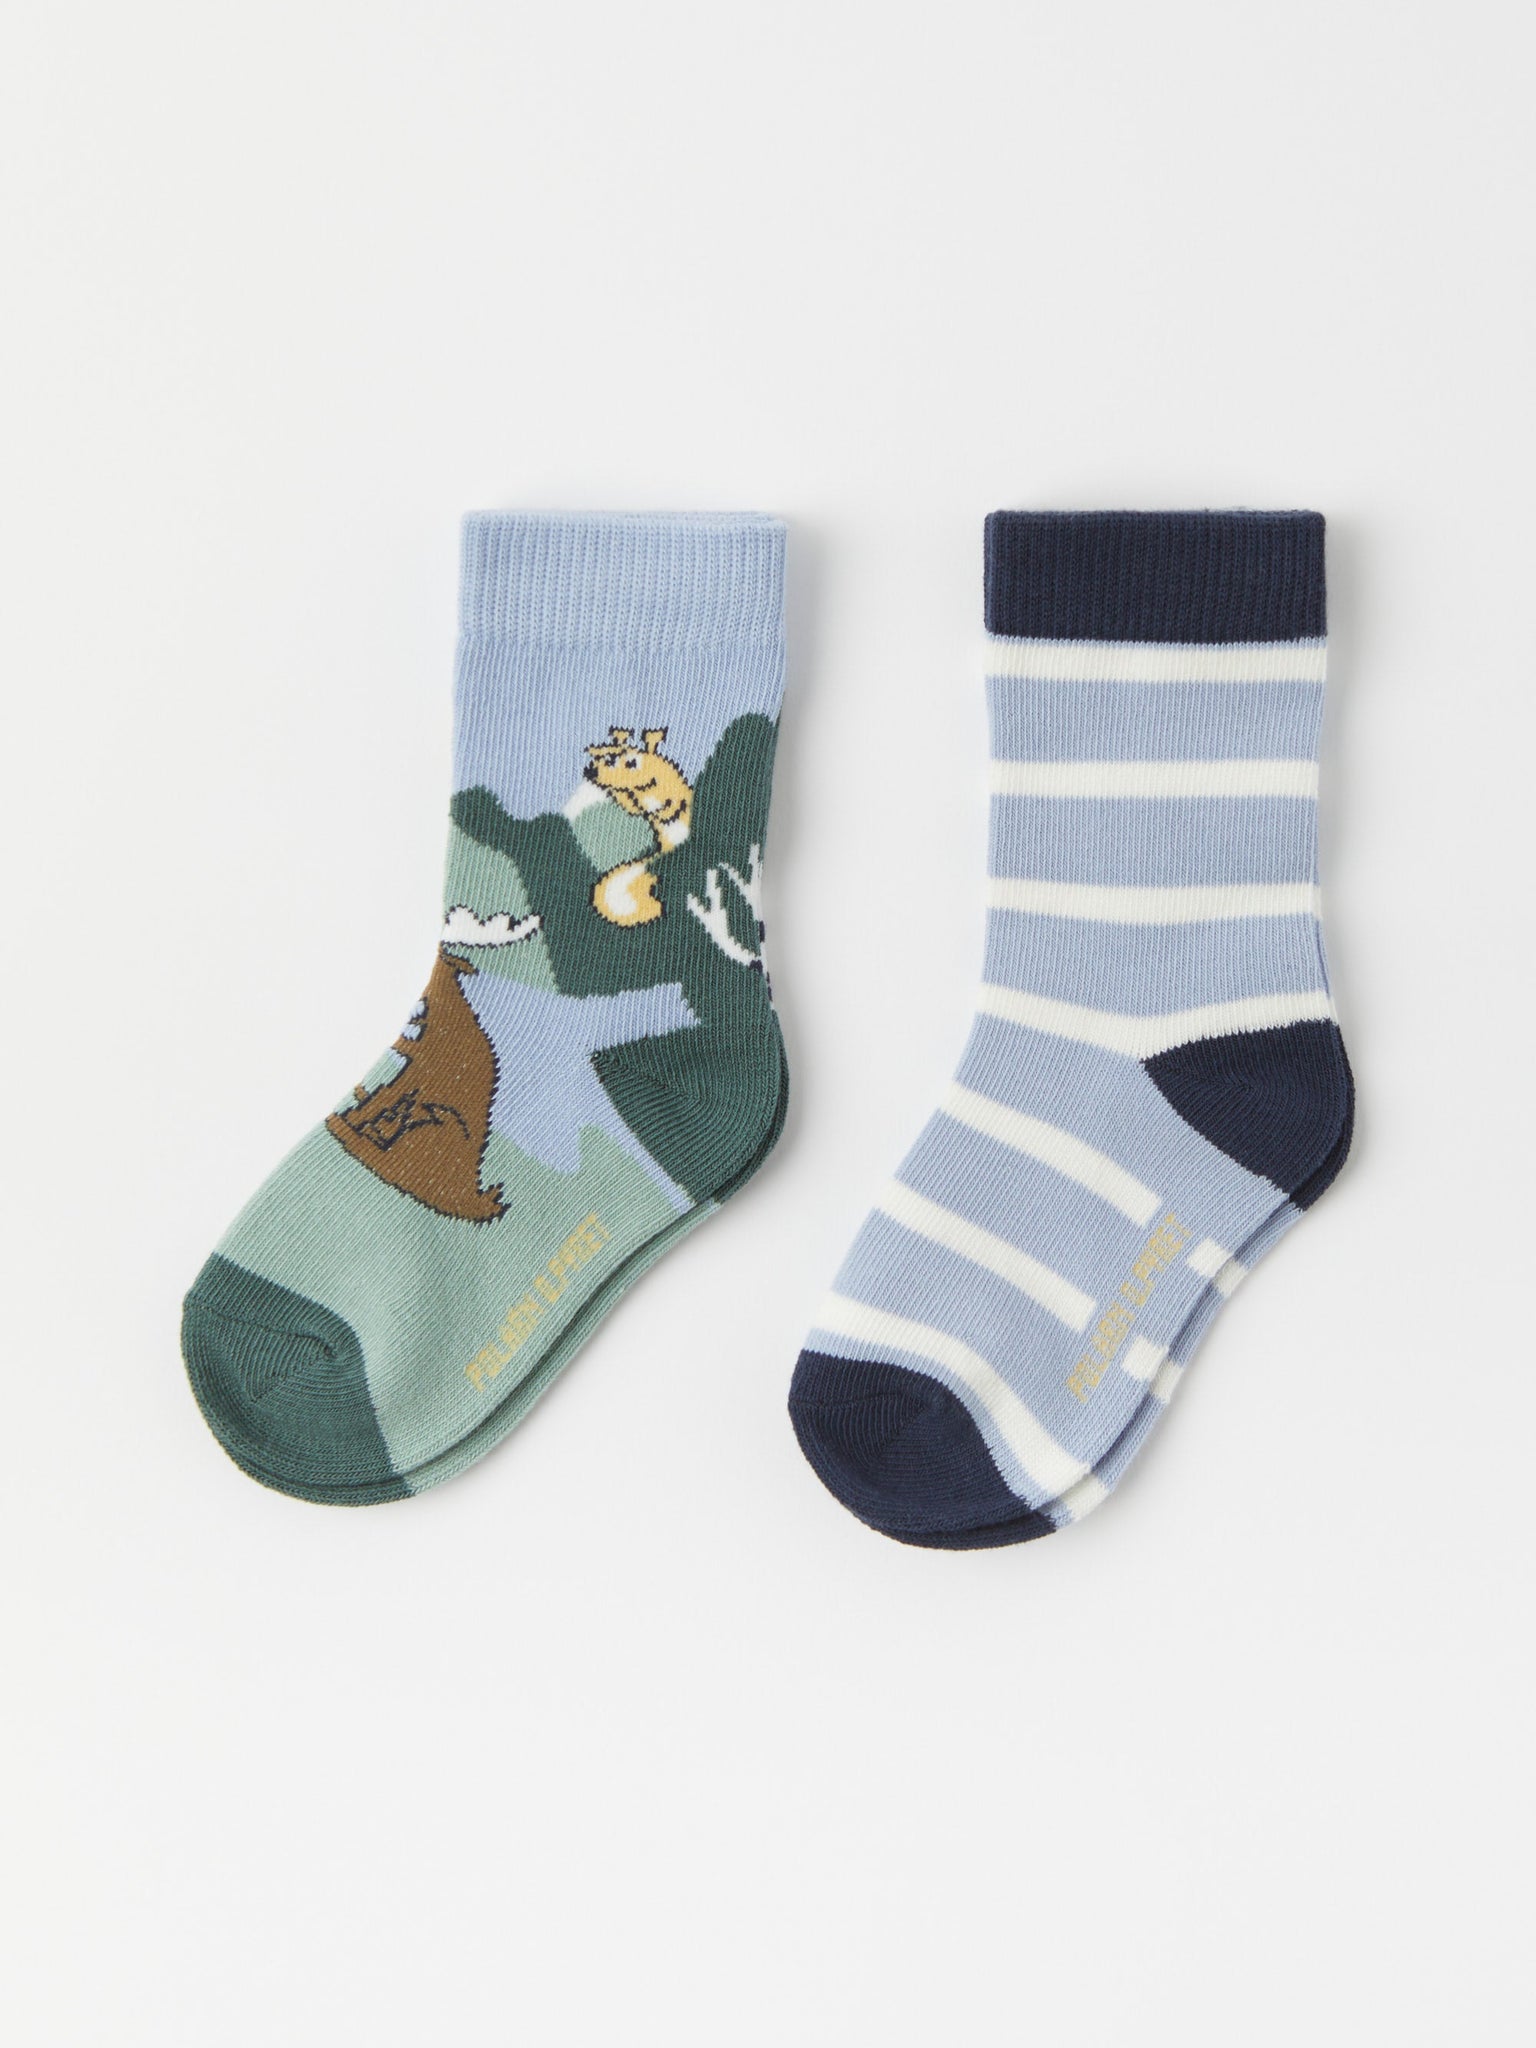 Two Pack Kids Socks from the Polarn O. Pyret kidswear collection. Clothes made using sustainably sourced materials.